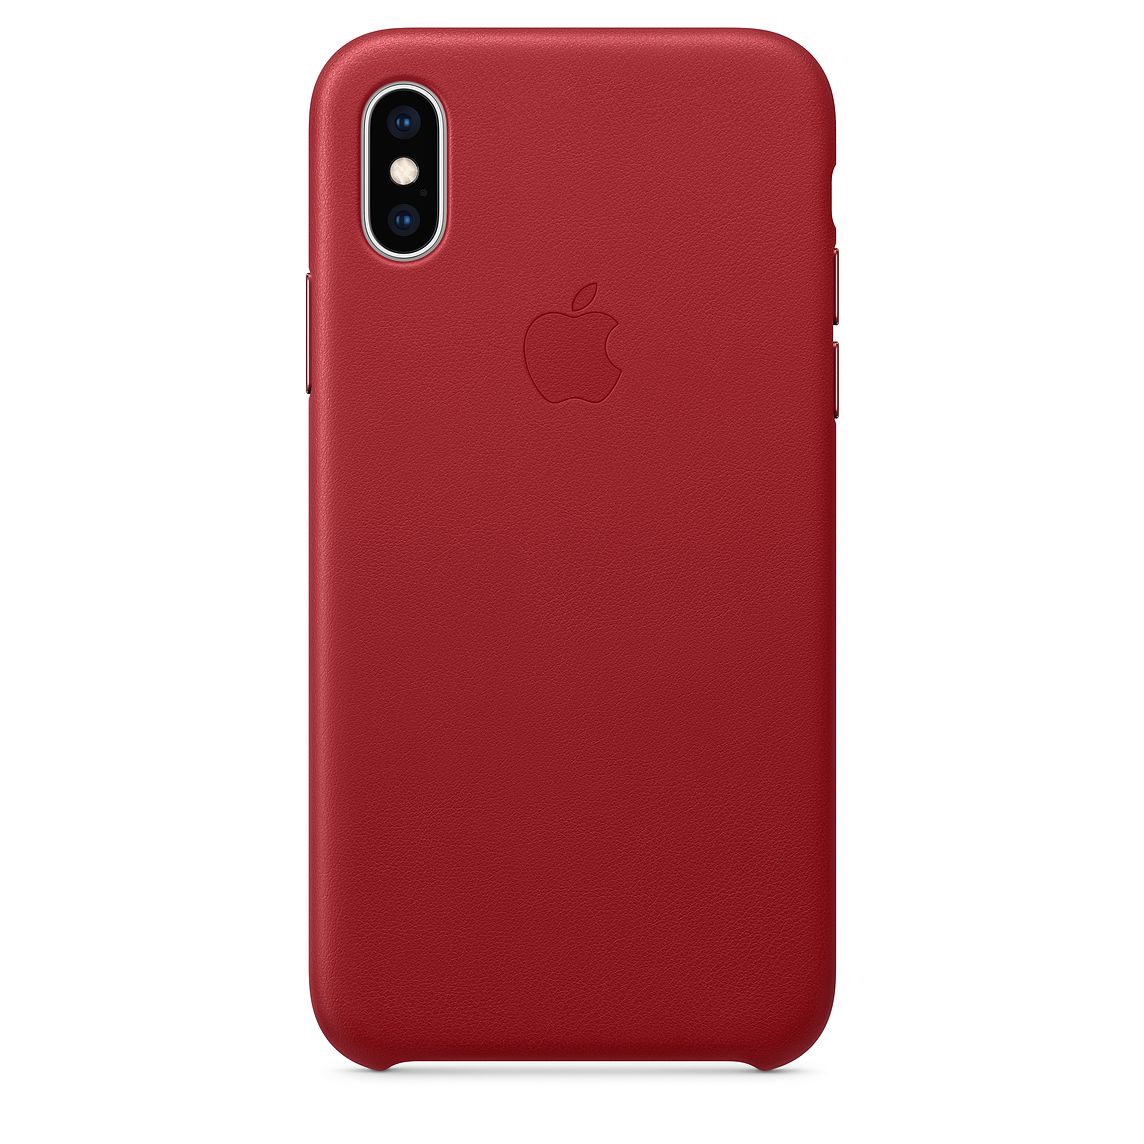 iPhone XS Max Leather Case Red MRWQ2FE/A